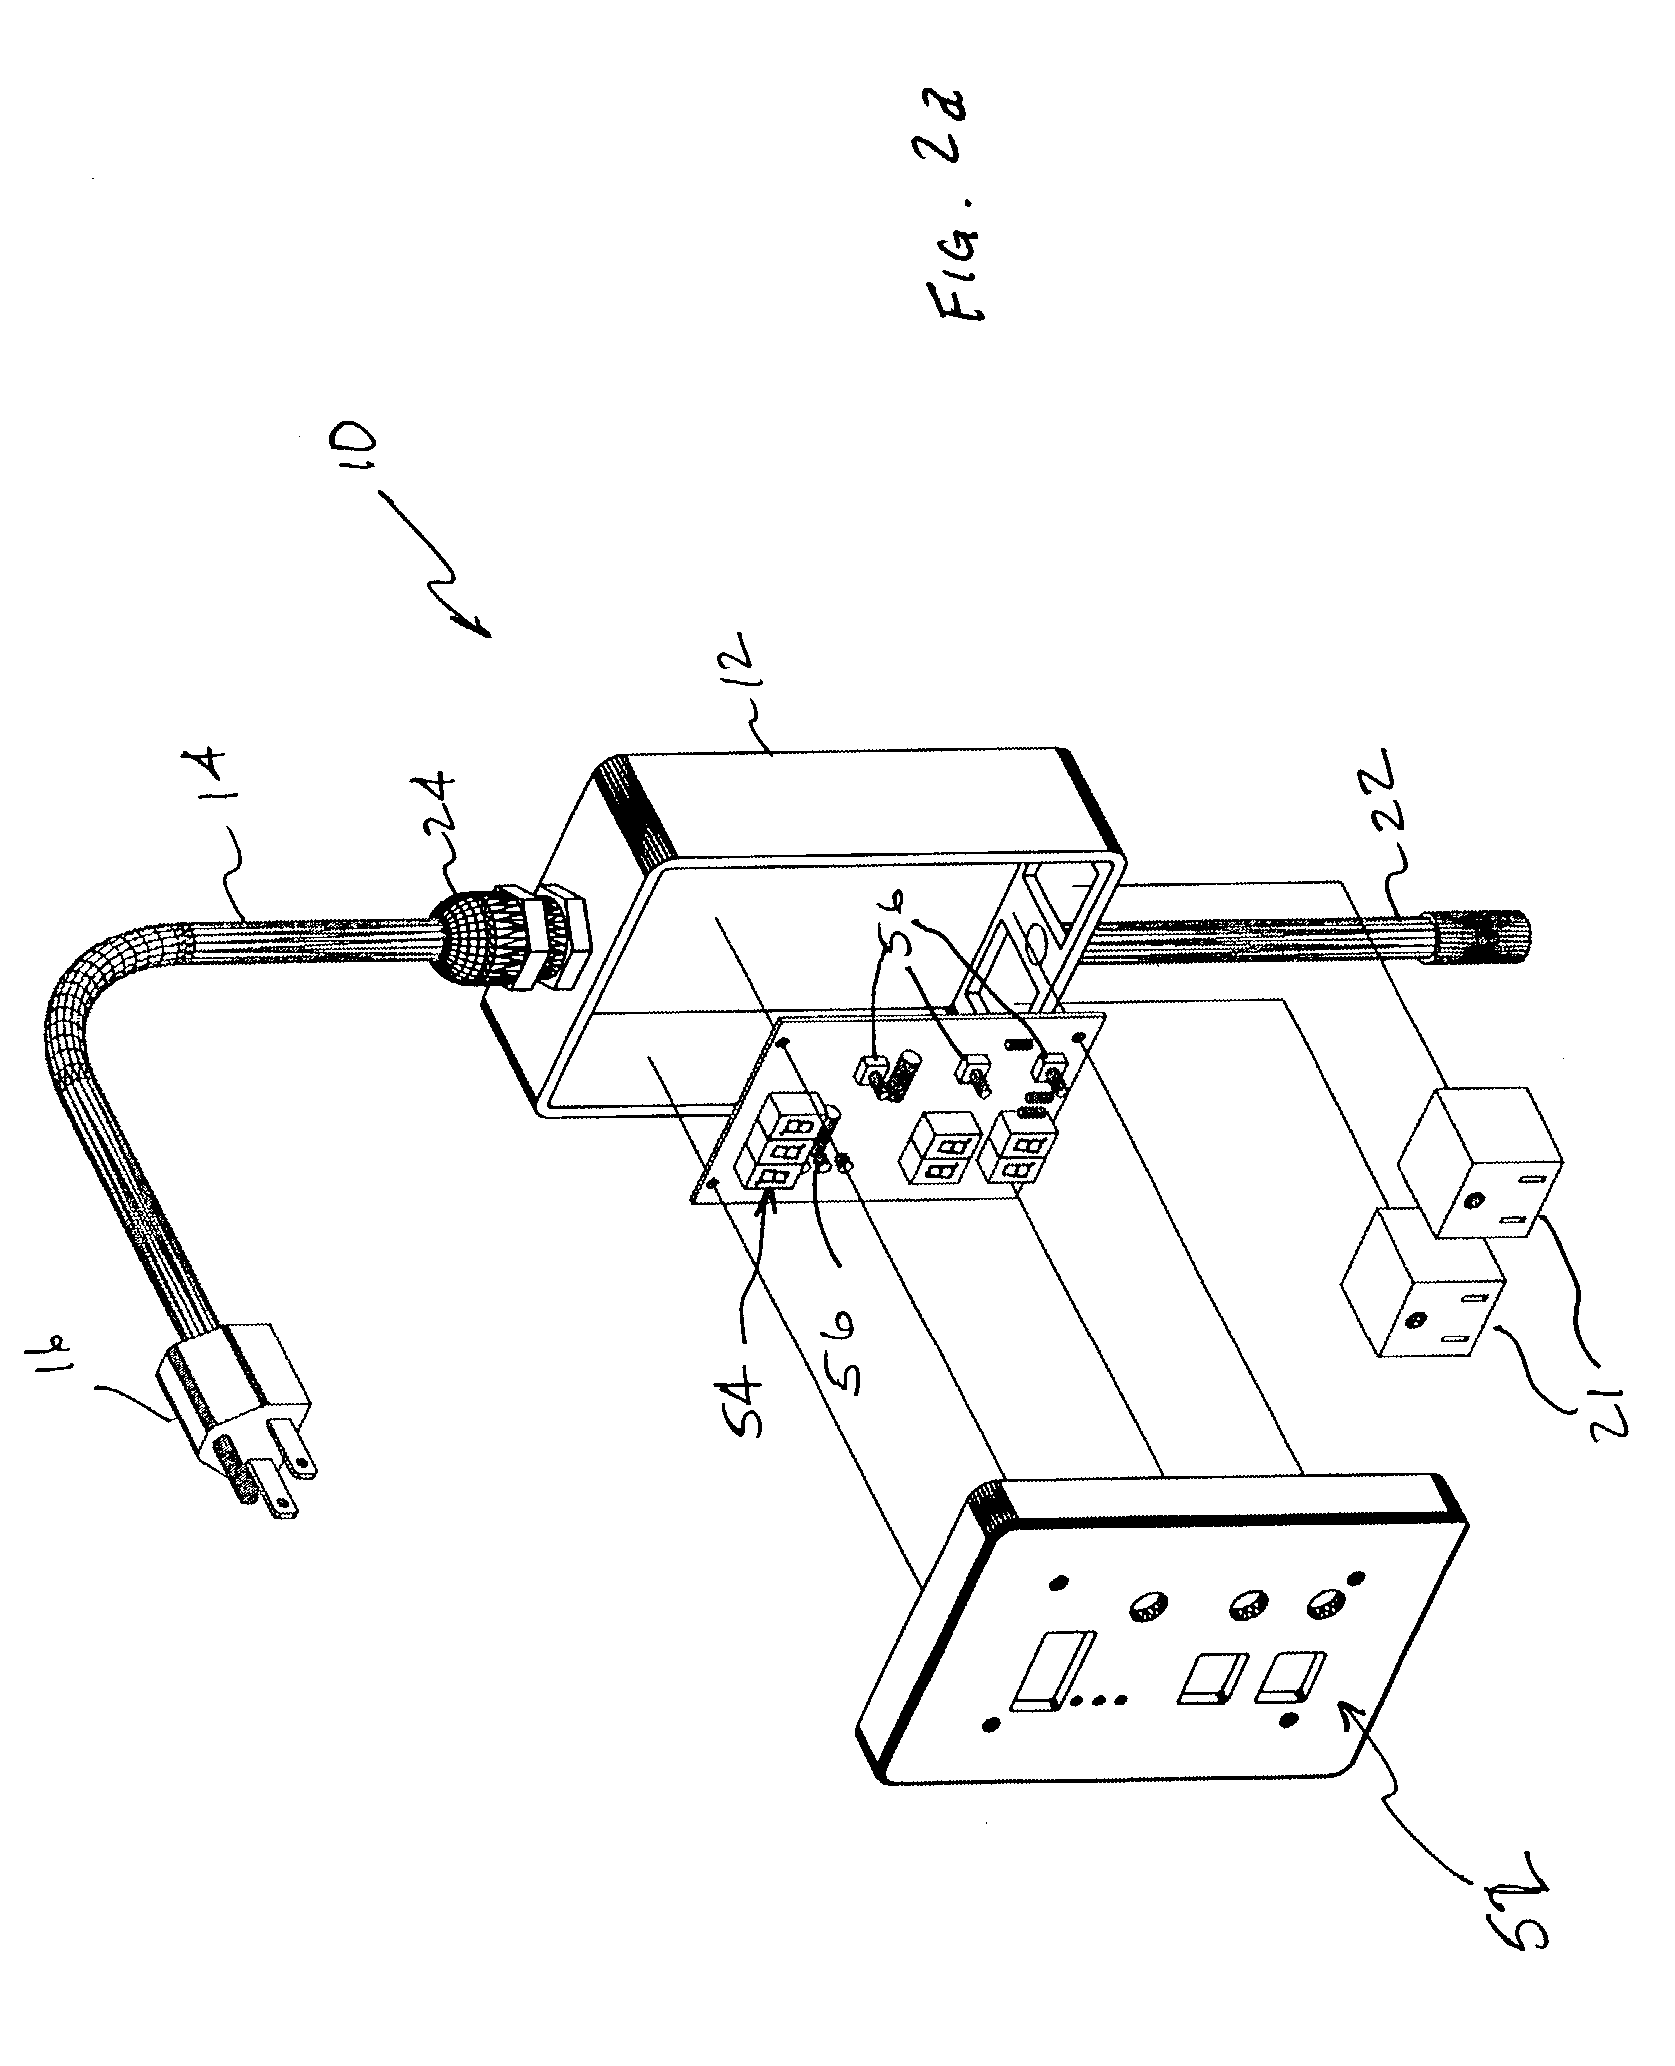 Electronic control for heating apparatus